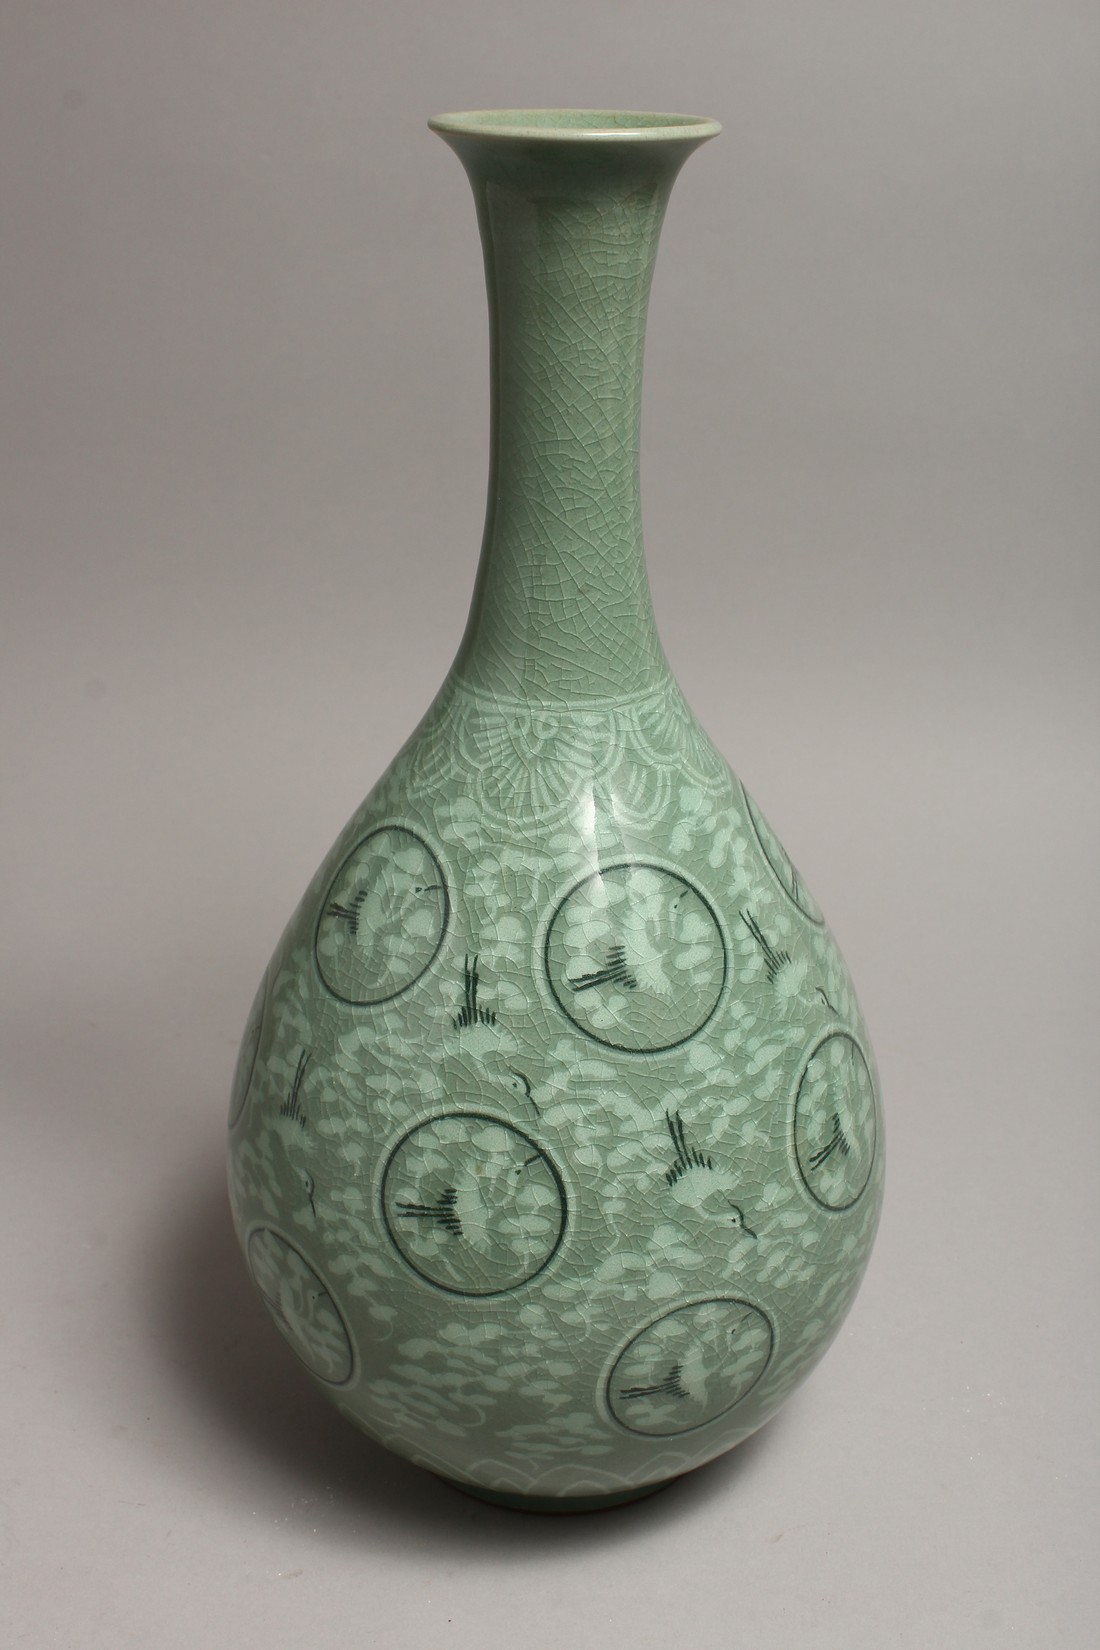 A KOREAN POTTERY BULBOUS VASE painted with storks 14ins high. - Image 5 of 6